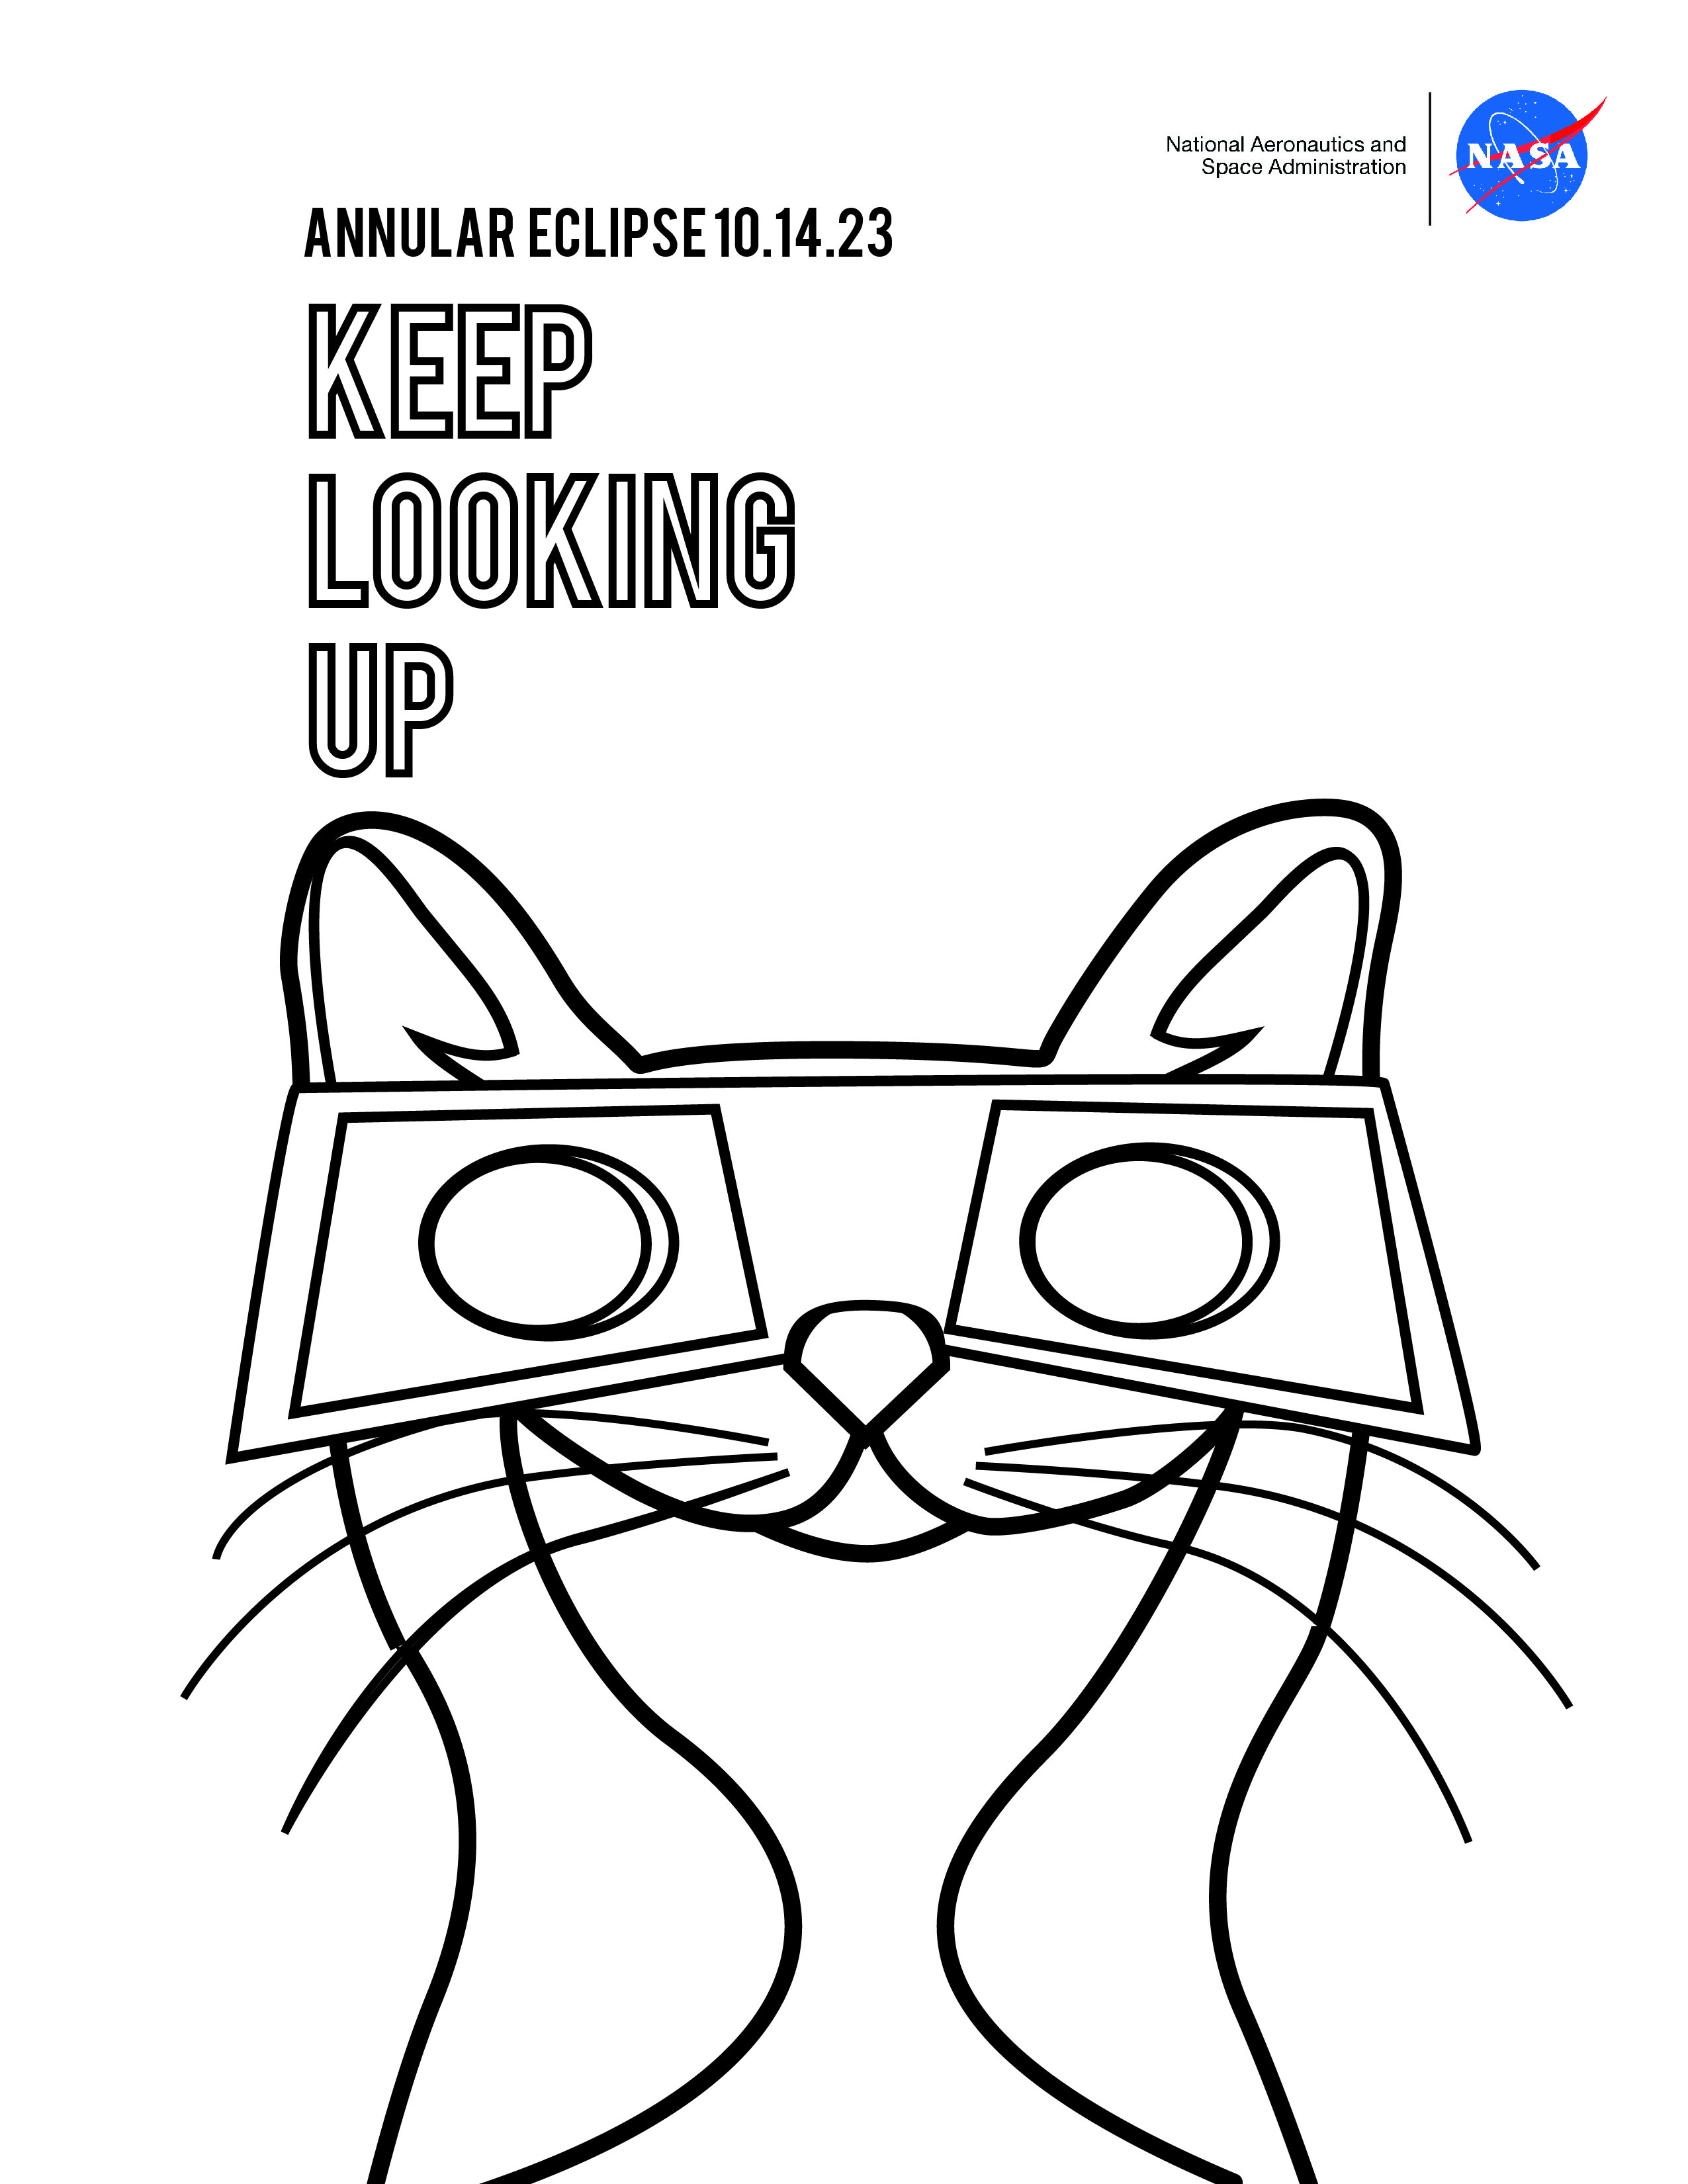 Annular eclipse cat coloring sheet